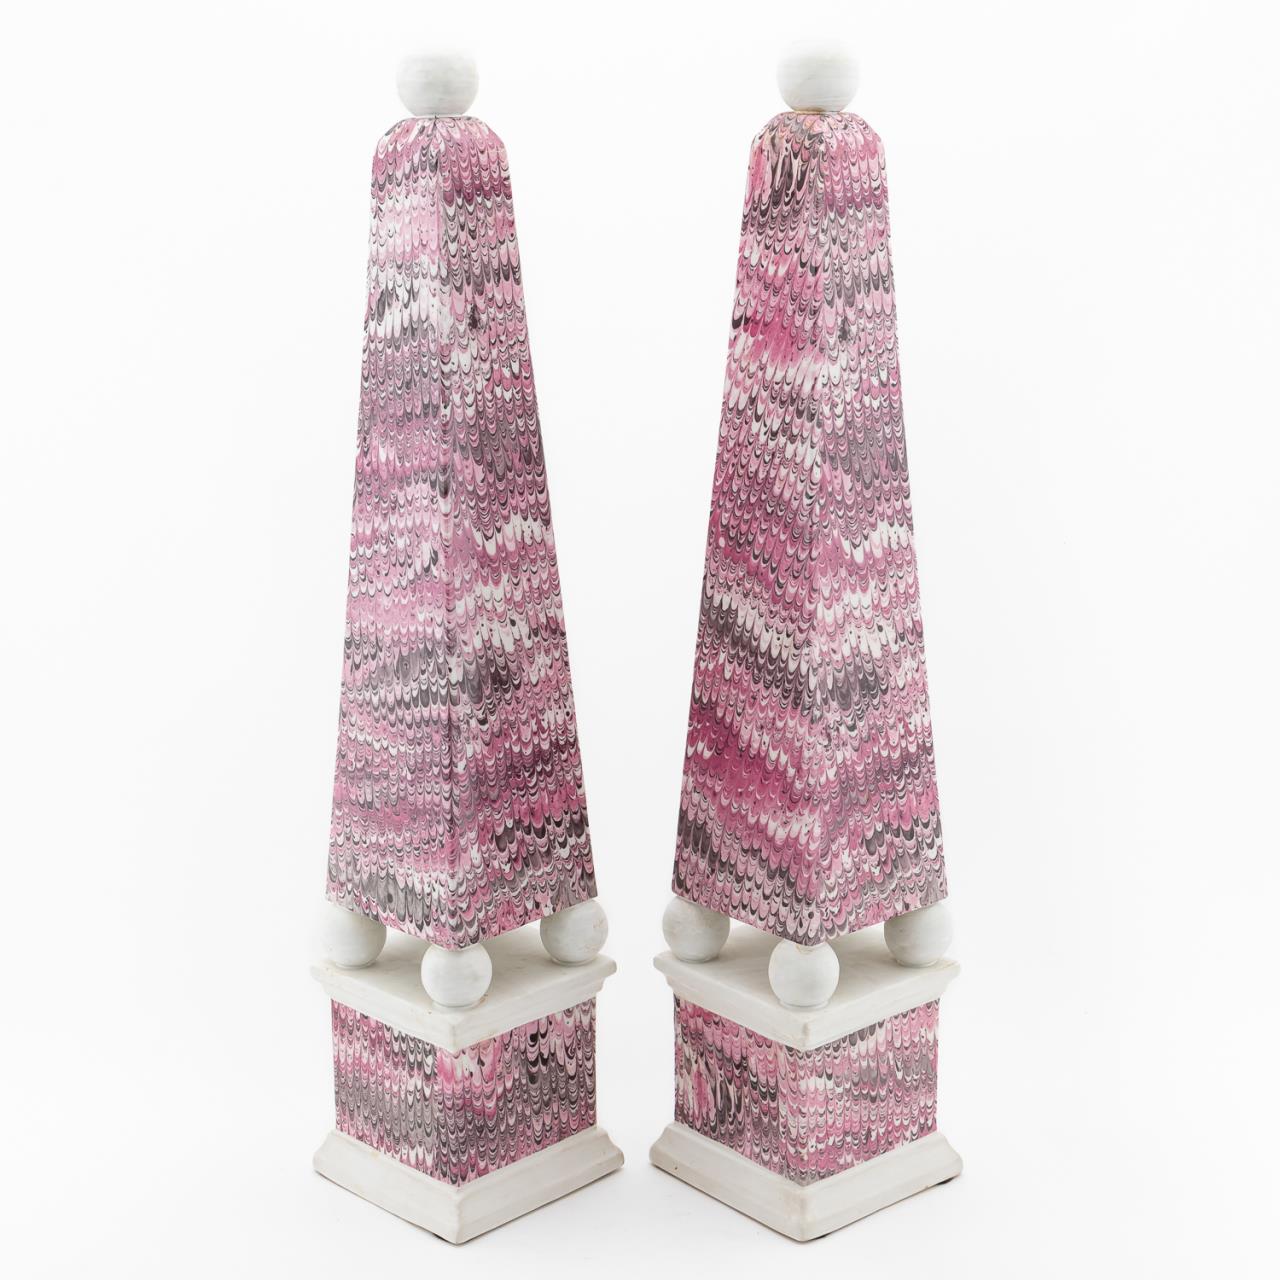 PAIR PINK MARBLE PATTERNED NEOCLASSICAL 35c6a9